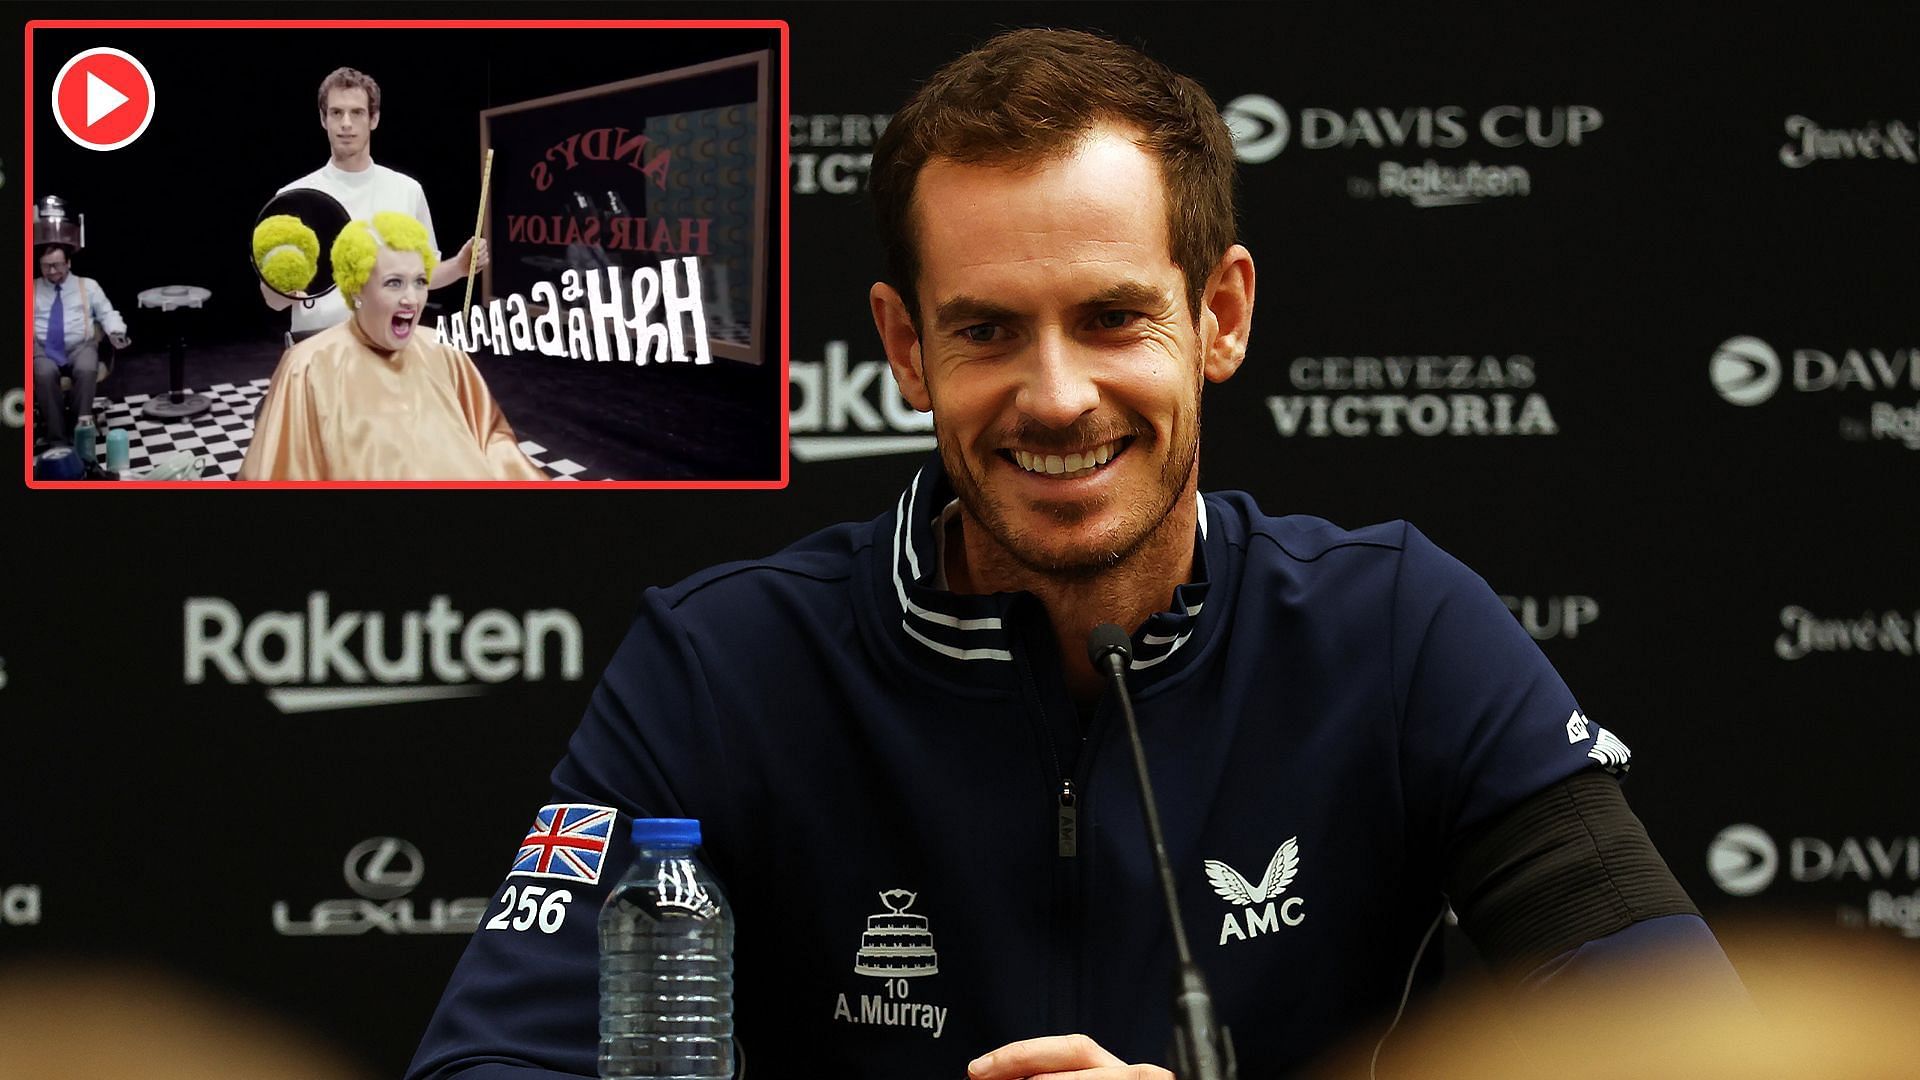 Andy Murray and a snippet of the advertisement (inset)